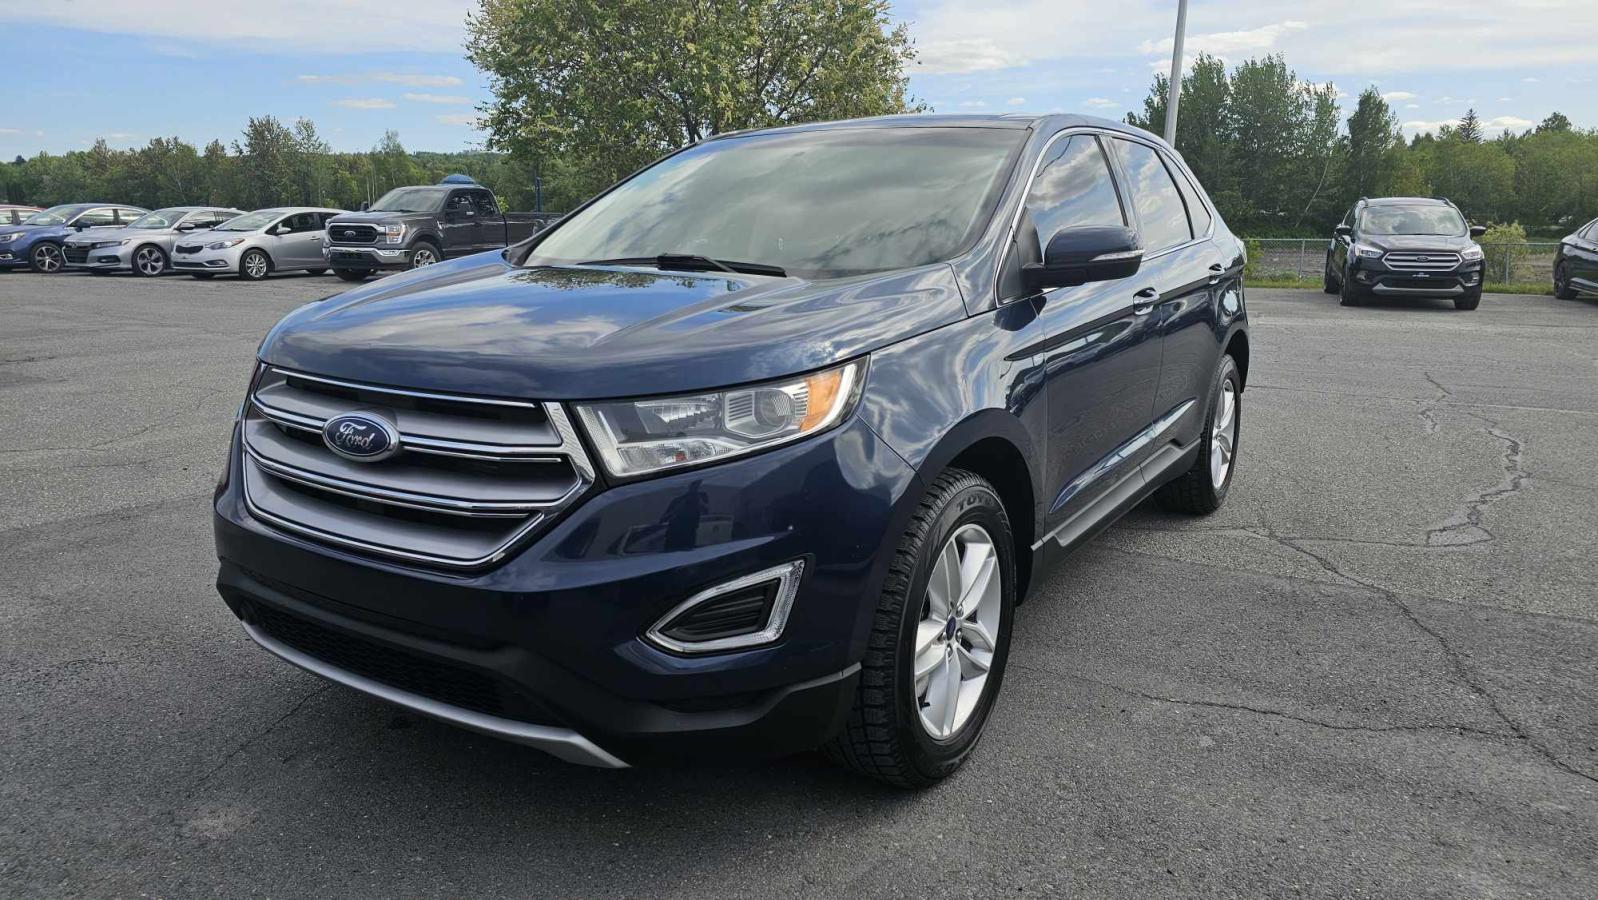 2017 Ford Edge SEL AWD V6 3.5L TOIT PANORAMIQUE GPS MAGS 18